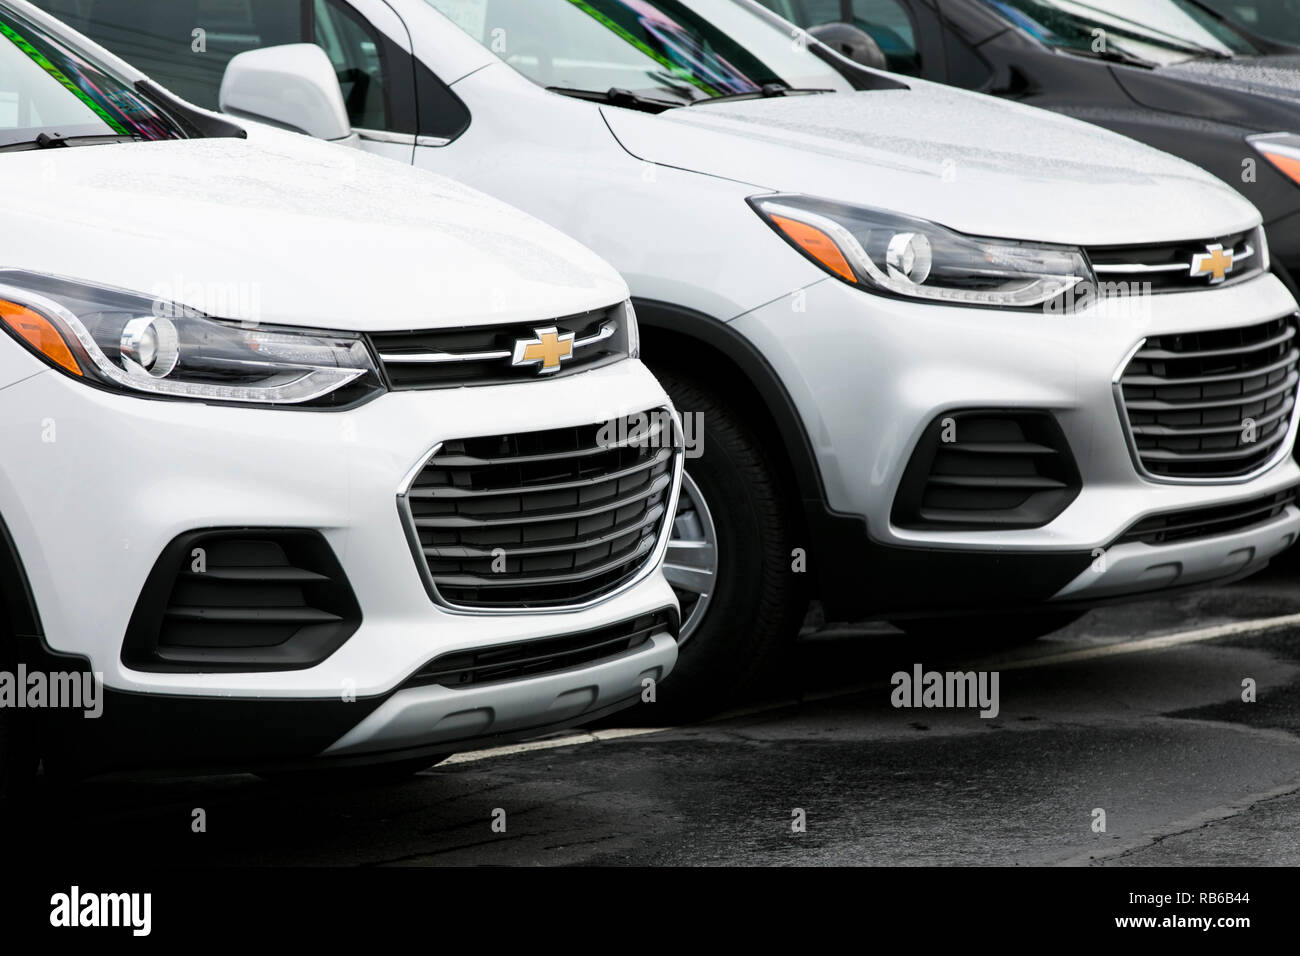 New Chevrolet (Chevy) Sport Utility Vehicles (SUV) on a dealer lot in Wilkes-Barre, Pennsylvania, on December 30, 2018. Stock Photo